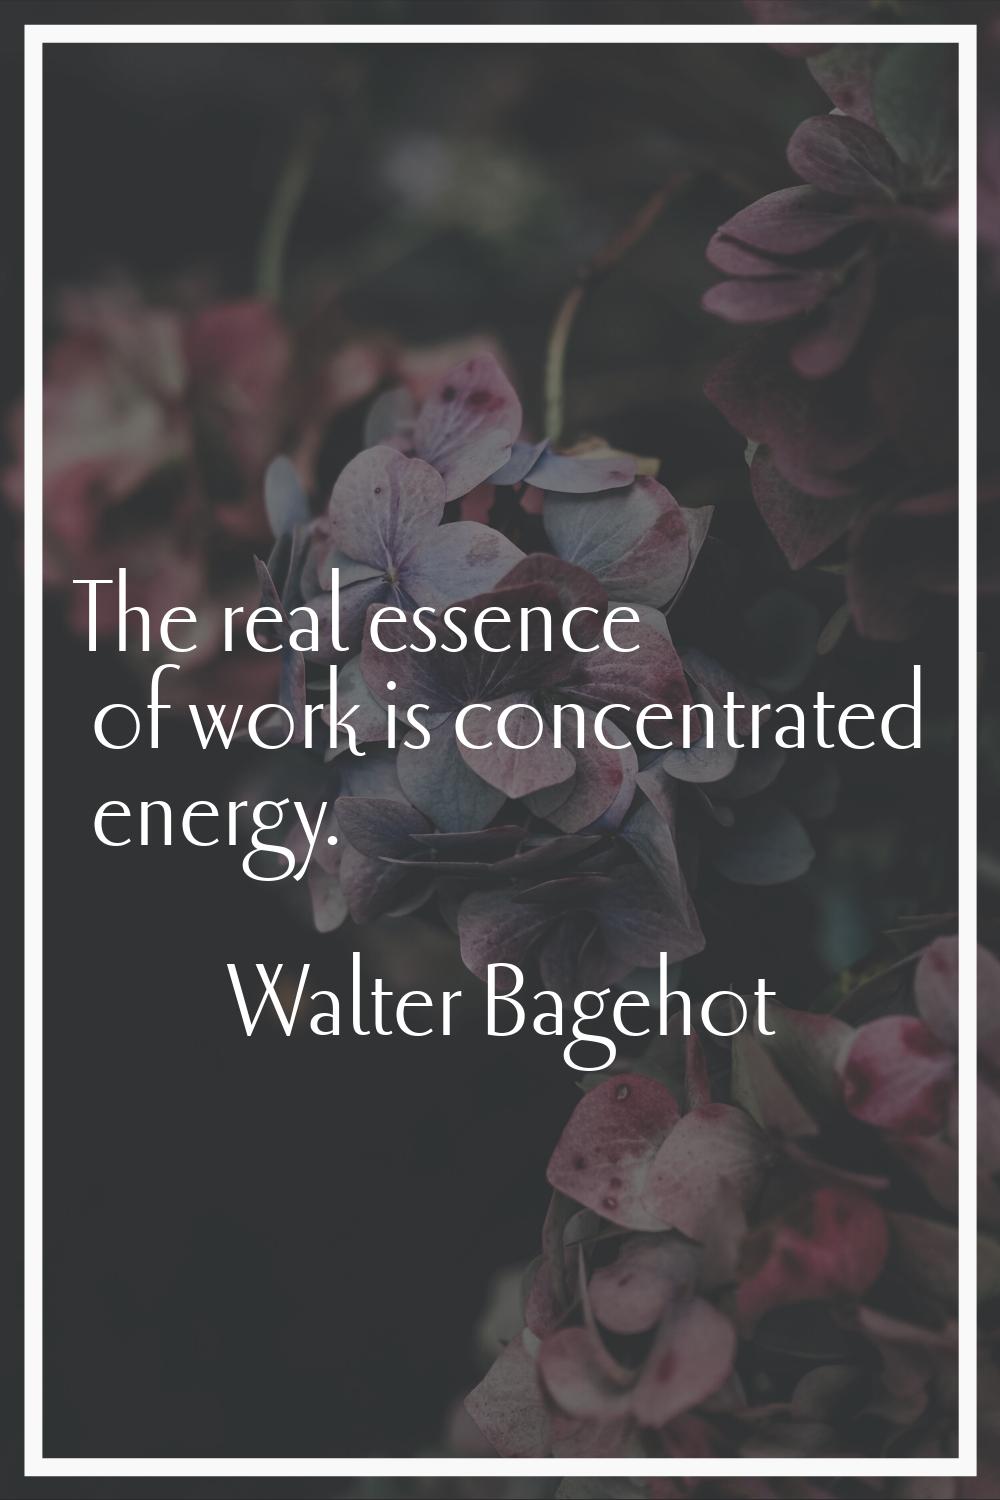 The real essence of work is concentrated energy.